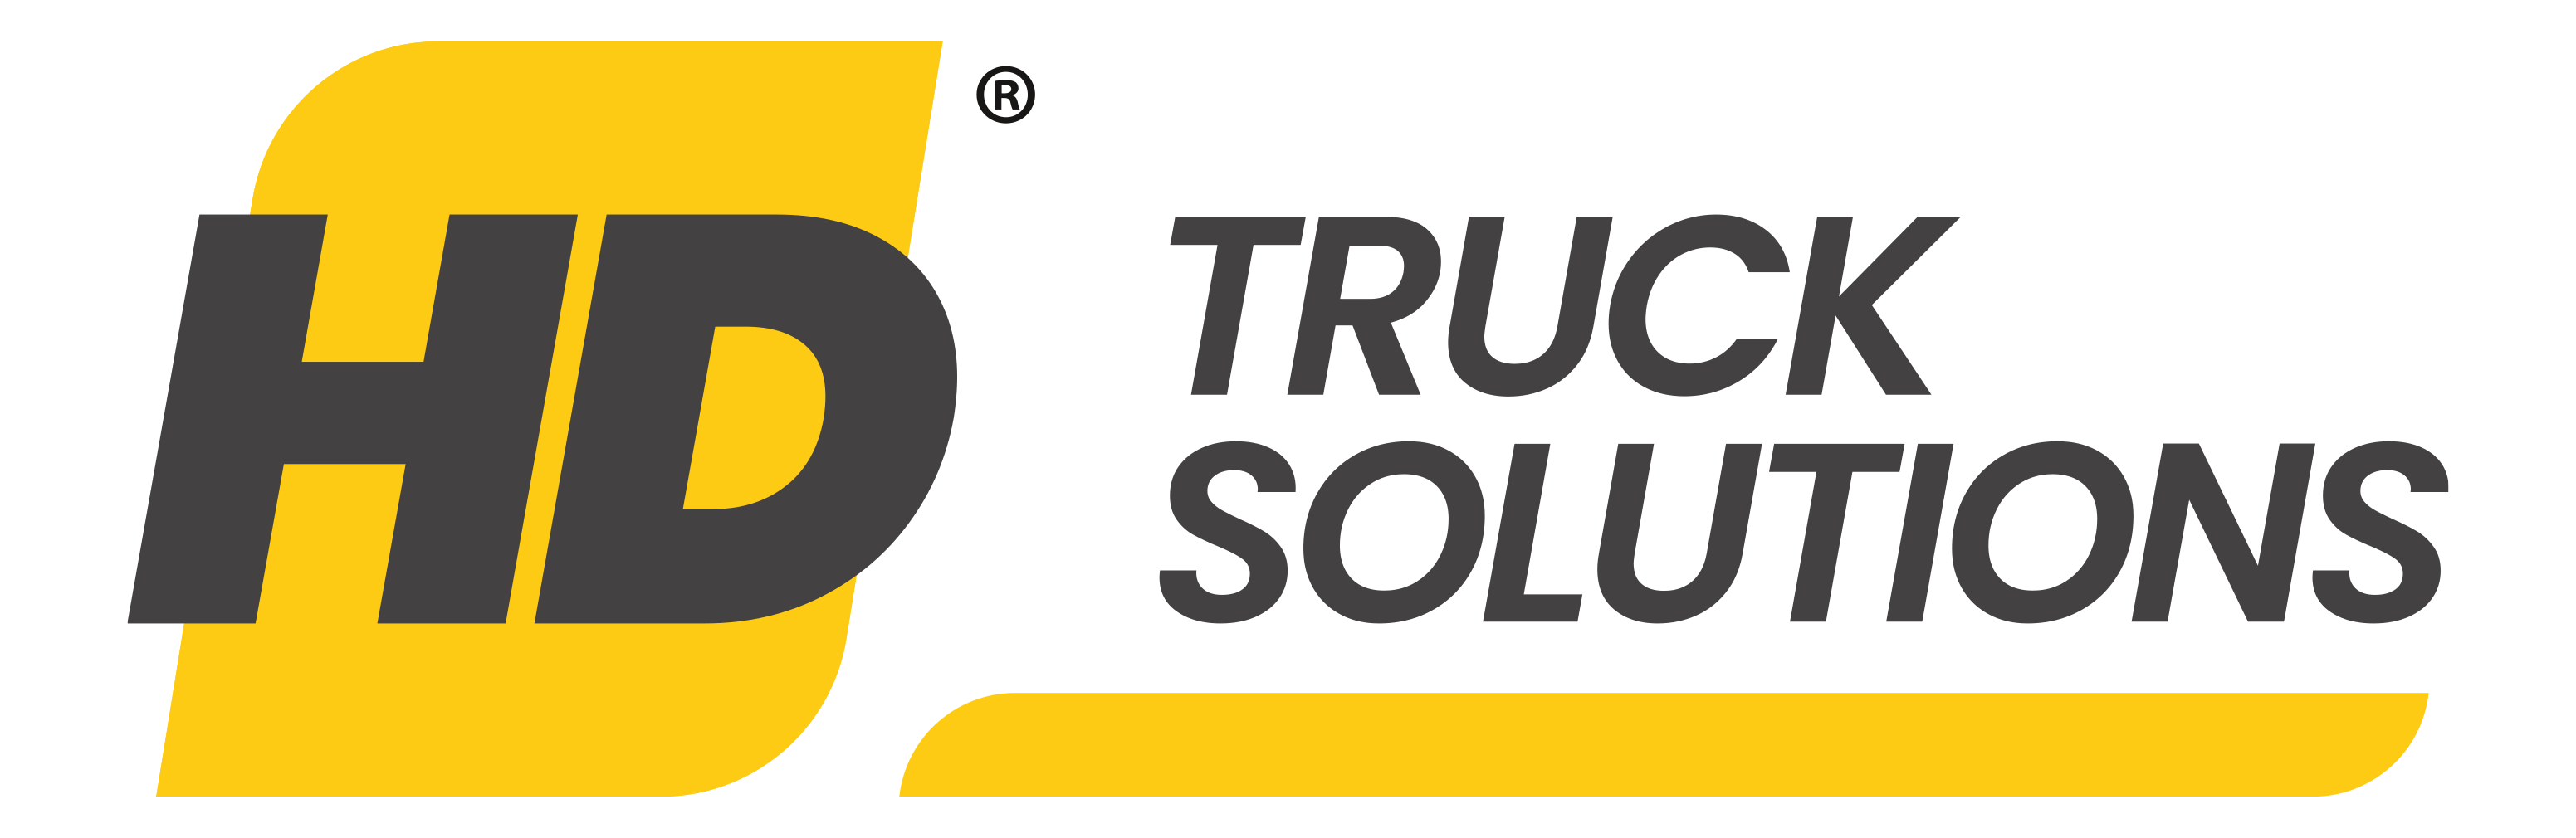 HD Truck Solutions GmbH &amp; Co. KG